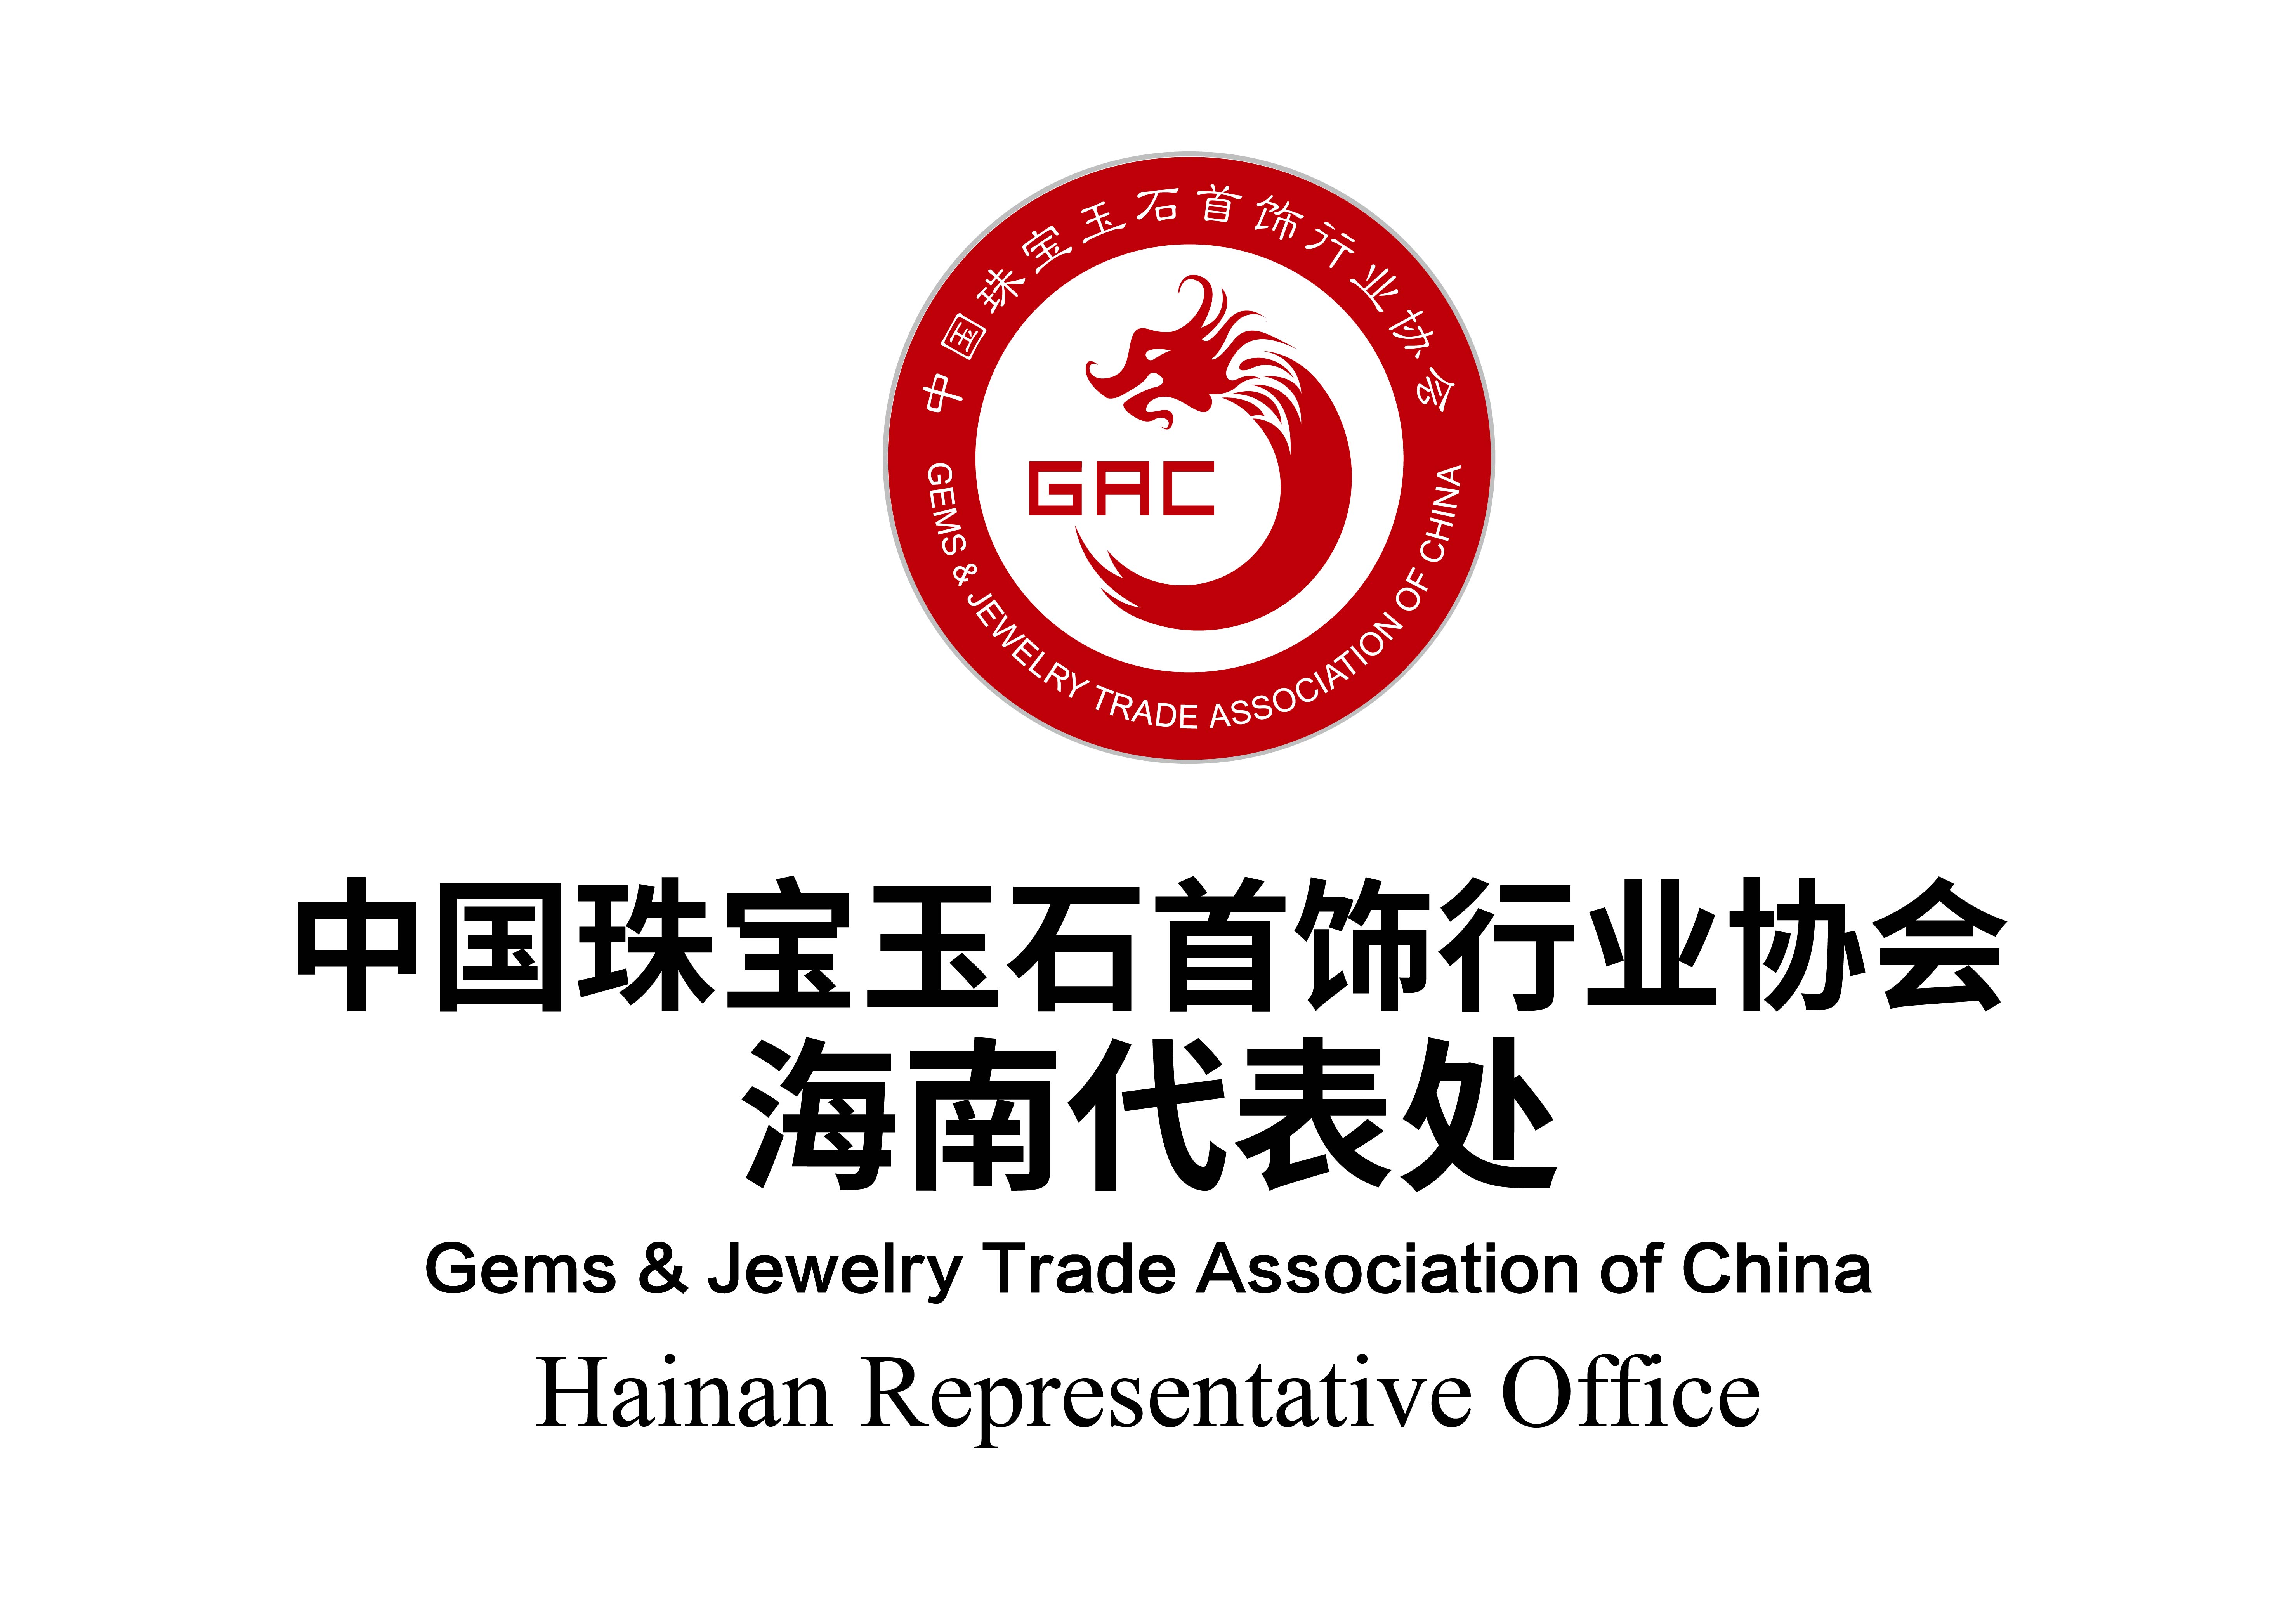 Gems and Jewelry Trade Associa